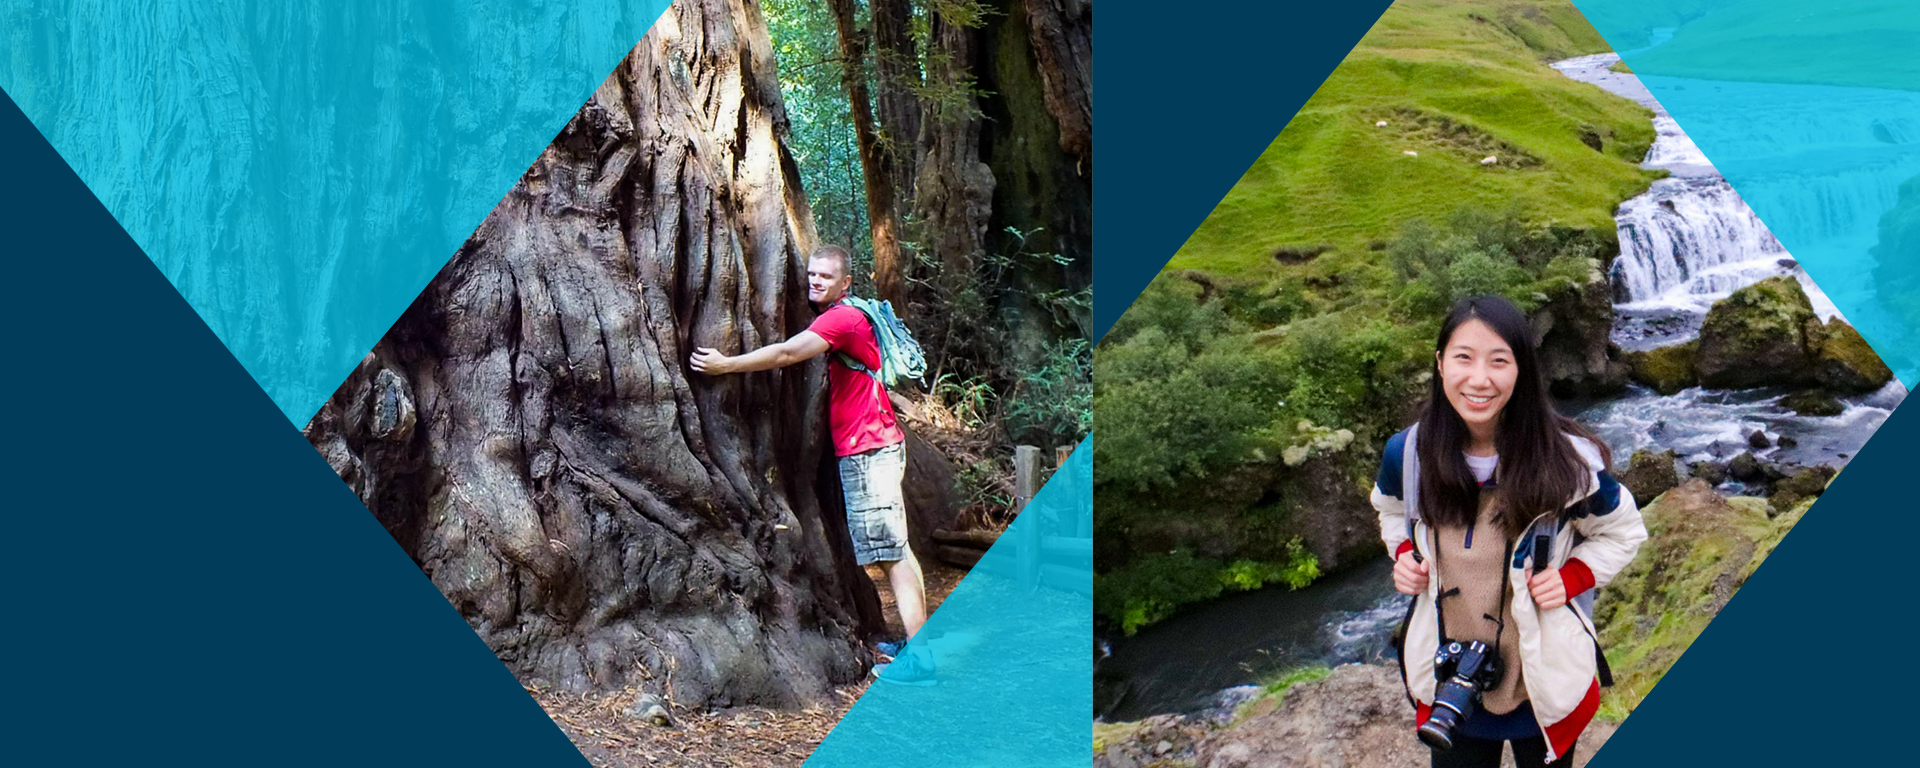 A collage of 2 images, one of Capital One Green Teams Member Matt hugging a tree, and one of Capital One Green Teams member Allison standing in front of a stream with a camera, with Capital One blue triangular elements